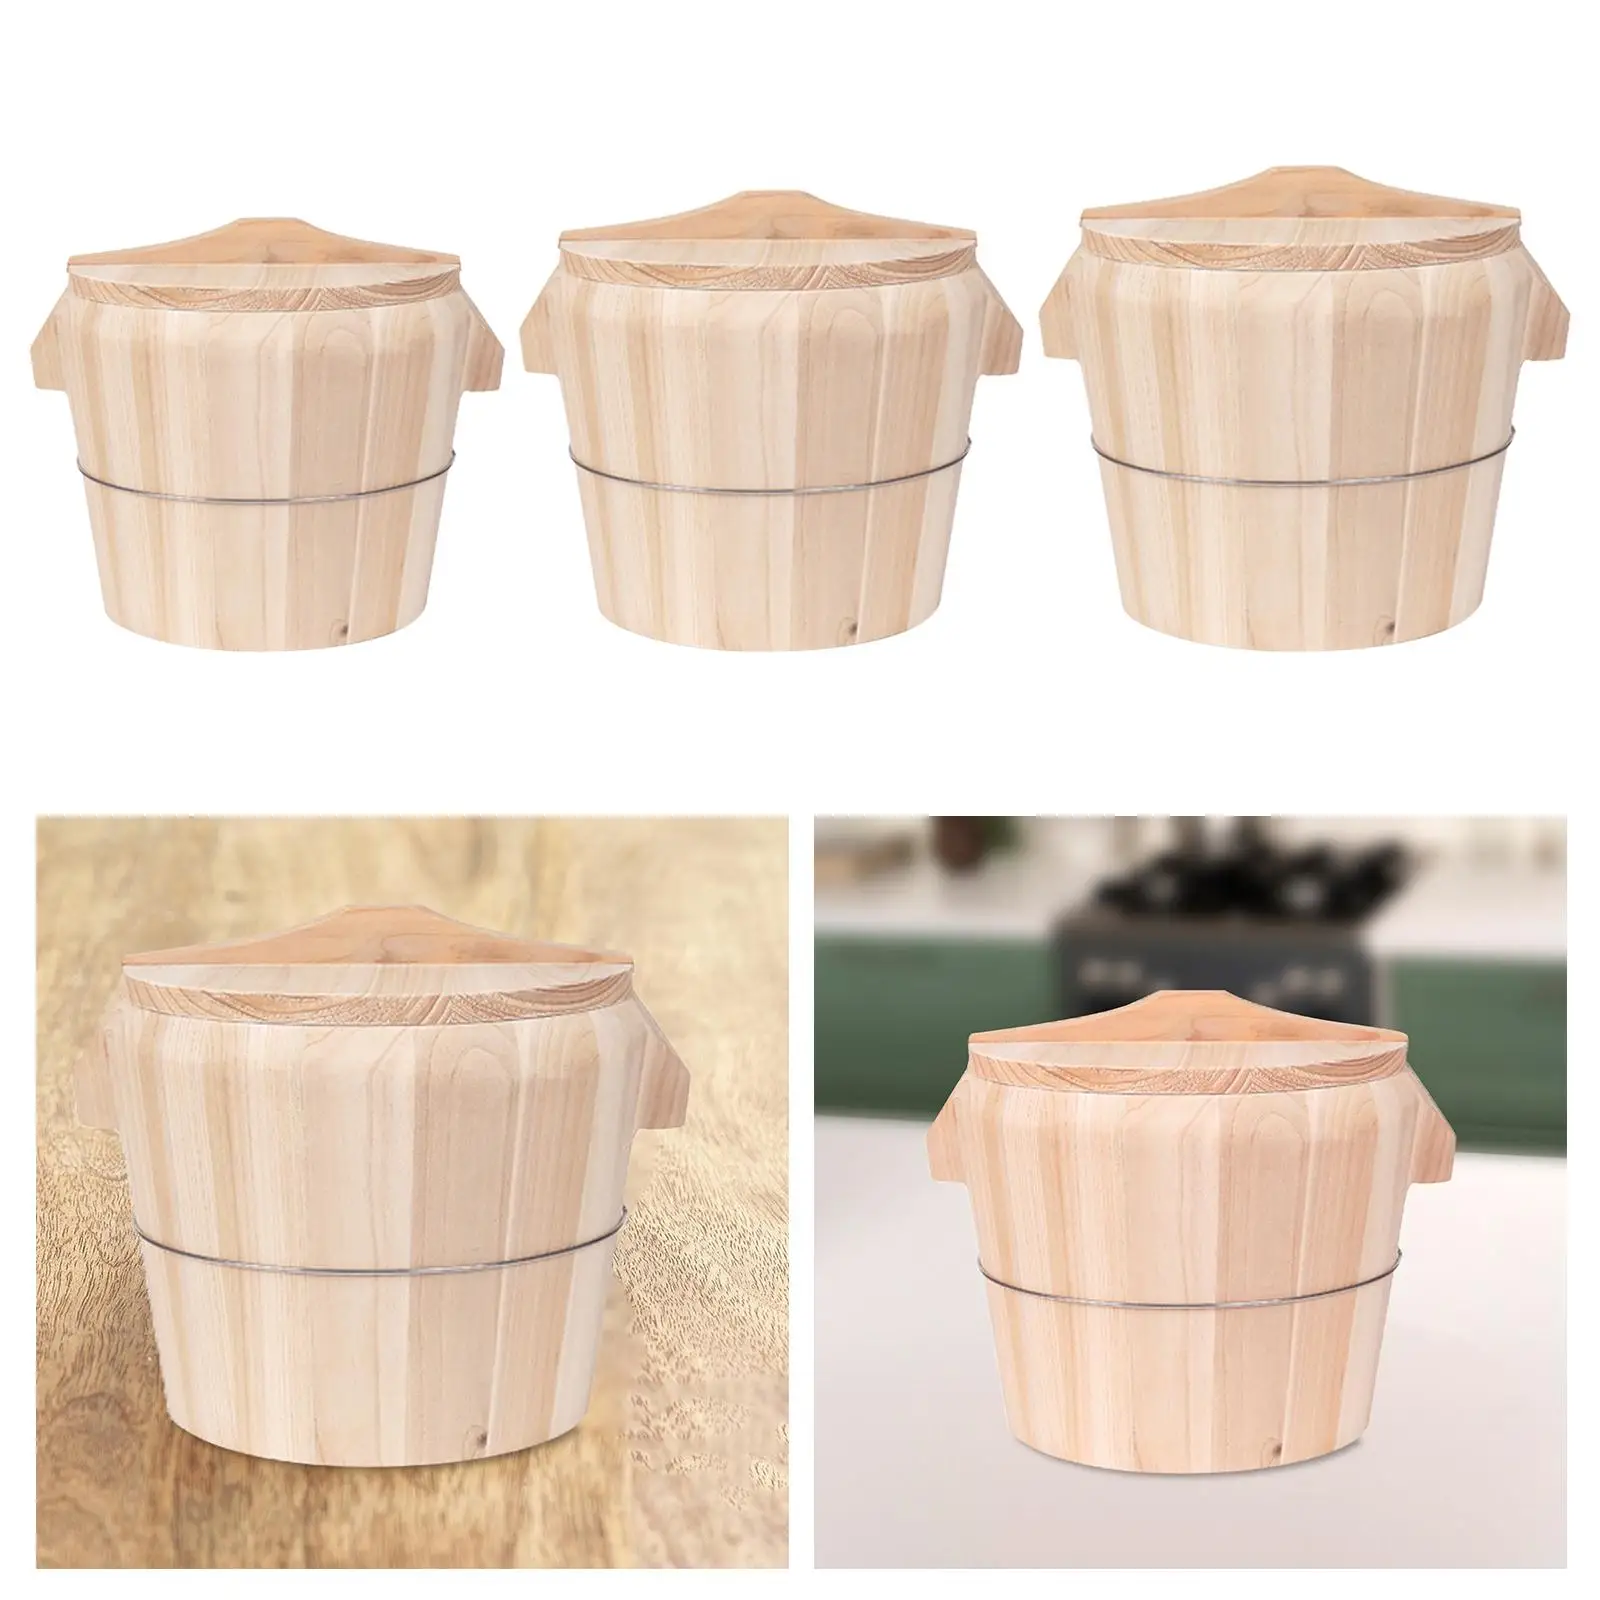 

Wooden Steamed Rice Barrel Rice Steamer Bucket Sturdy Dinner Plate Round Rice Bowl Sushi Rice Bowl for Tofu Pudding Appetizer